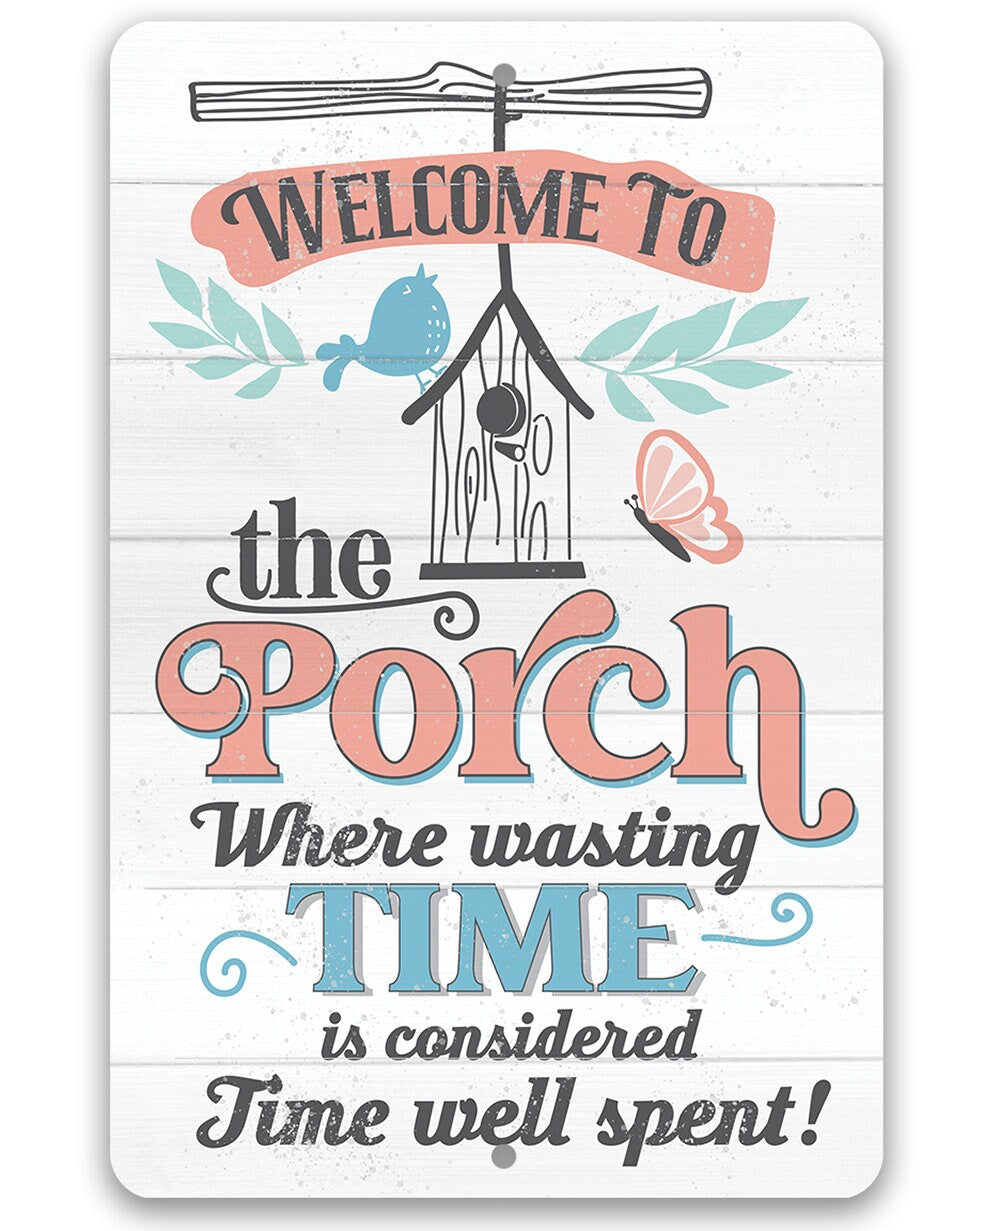 Welcome to the Porch Where Wasting Time is Considered Time Well Spent - Metal Sign Metal Sign Lone Star Art 